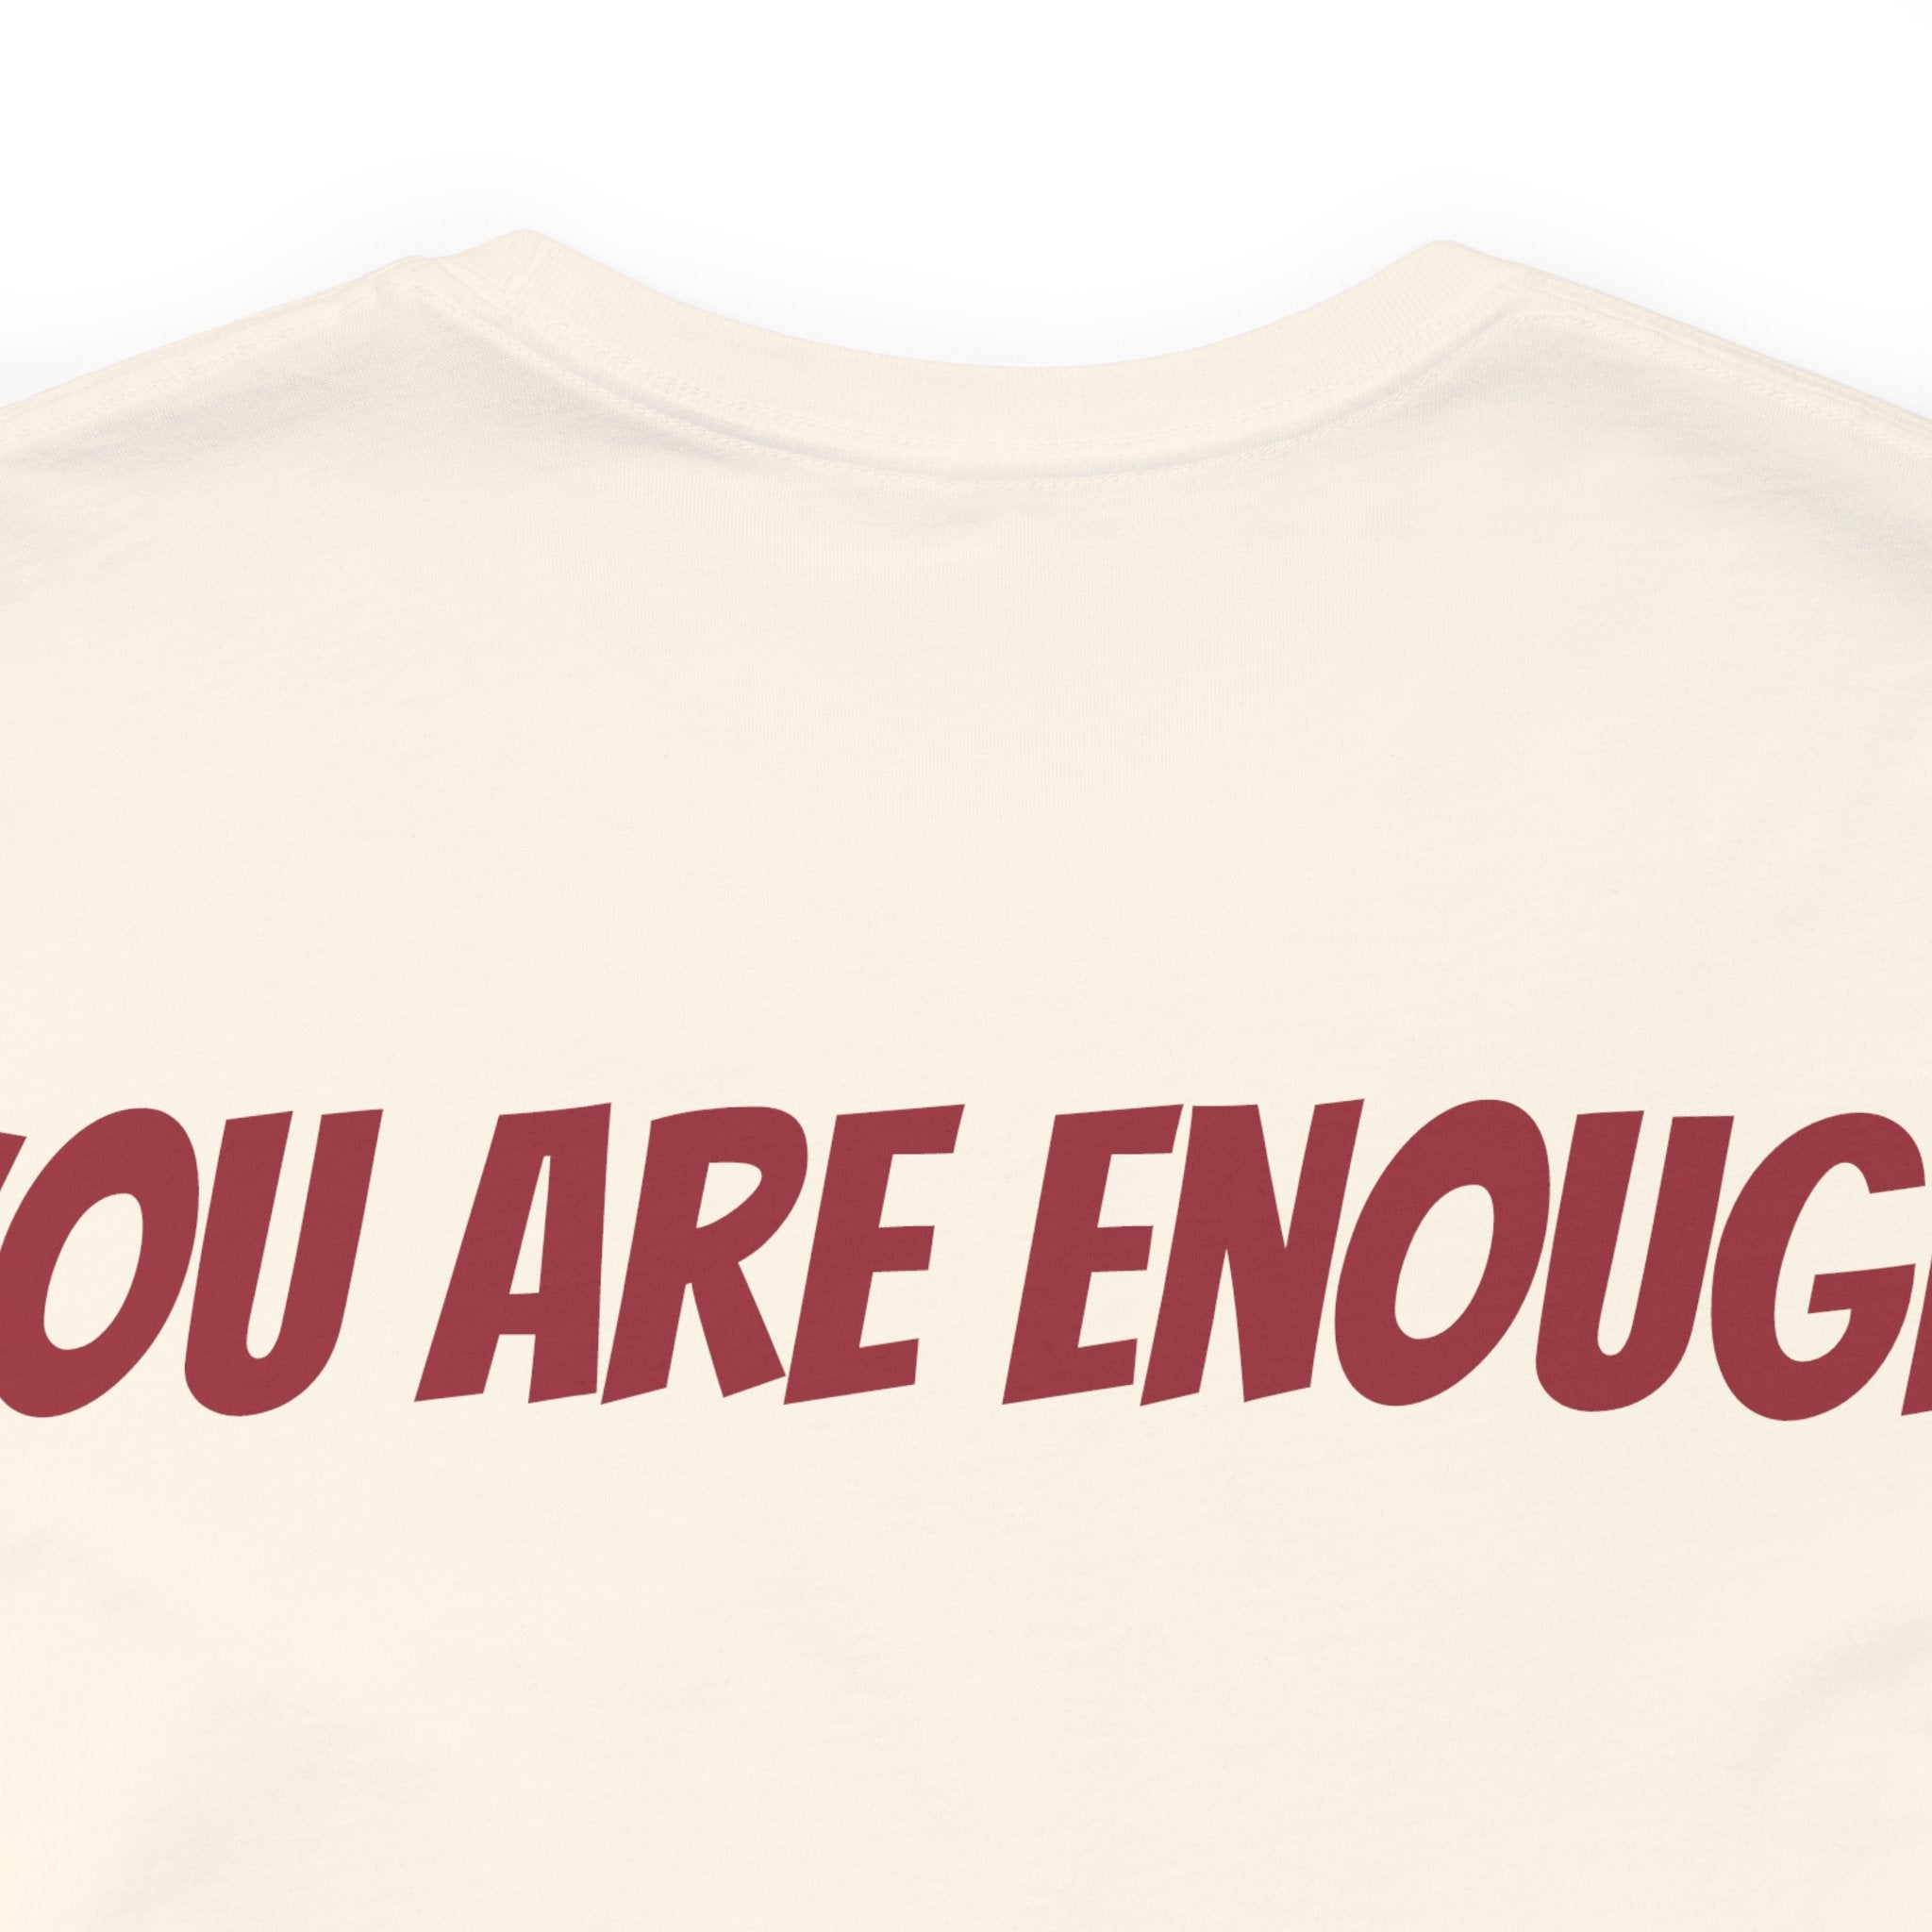 You Are Enough Short Sleeve Tee Bella+Canvas 3001 Natural Airlume Cotton Bella+Canvas 3001 Crew Neckline Jersey Short Sleeve Lightweight Fabric Mental Health Support Retail Fit Tear-away Label Tee Unisex Tee T-Shirt 9551136742217006852_2048 Printify